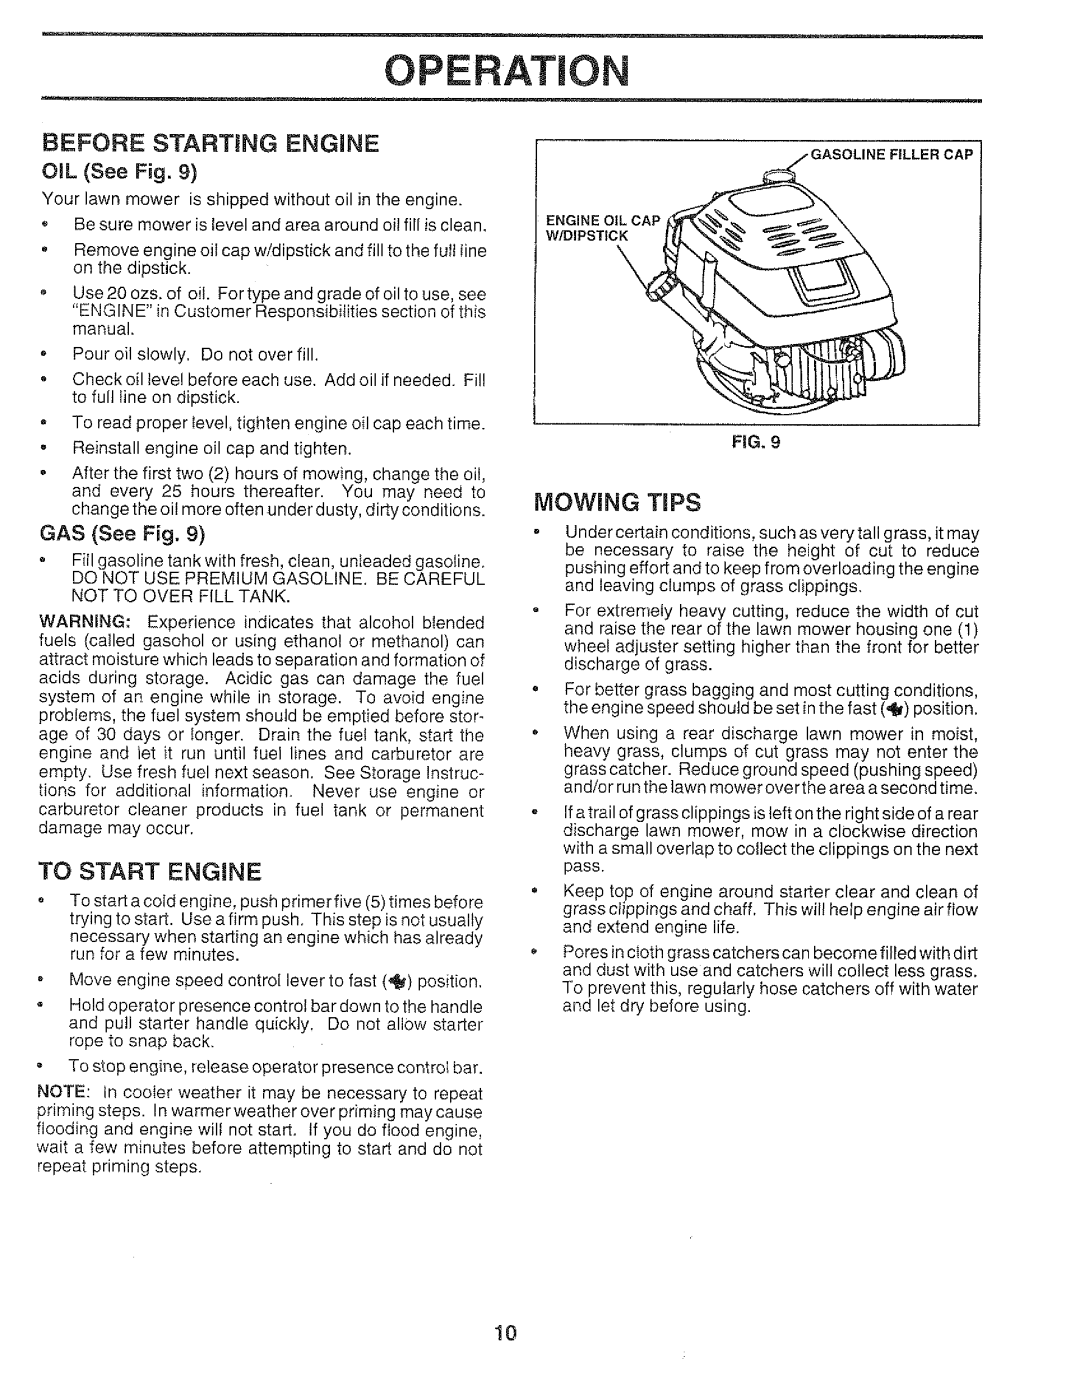 Craftsman 917.37459 owner manual Operation, Before Starting Engine, To Start Engine, Mowing Tips, GAS See Fig 